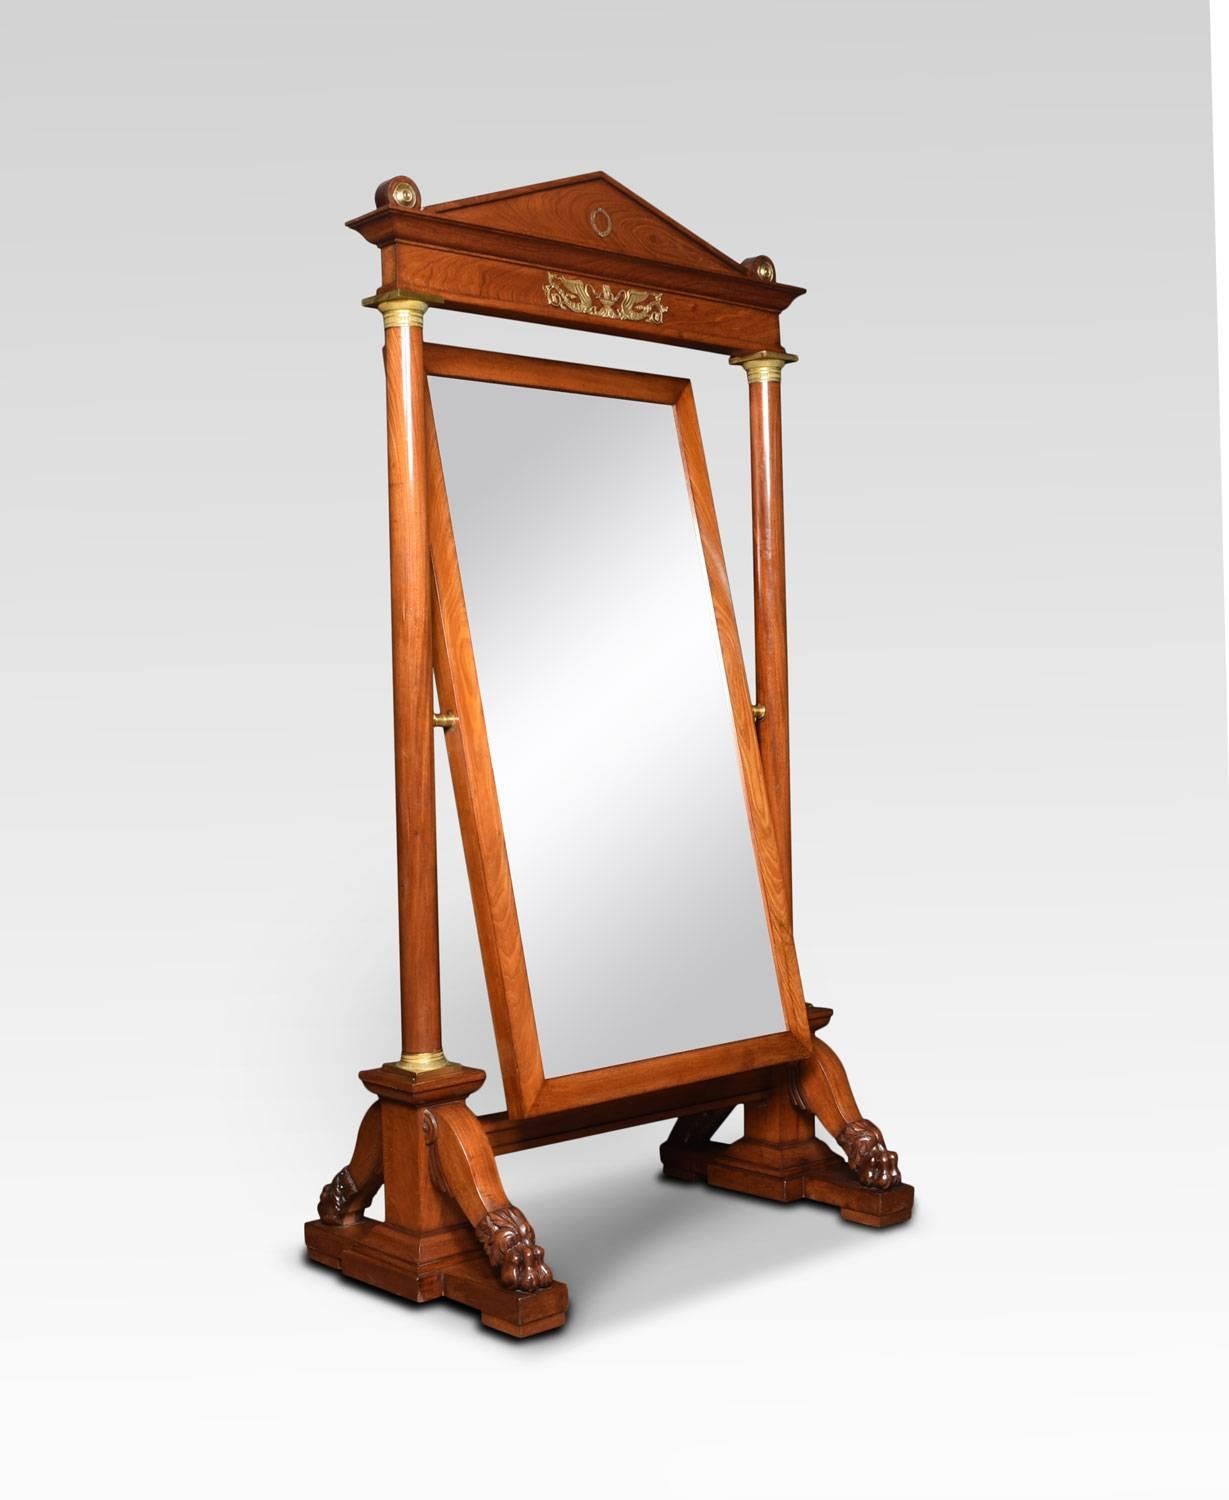 Very large figured mahogany and ormolu mounted cheval mirror, the architectural top above rectangular mirror plate supported by turned pilasters. The square stepped base section having hairy paw feet.
Dimensions:
Height 77.5 inches
Width 43.5